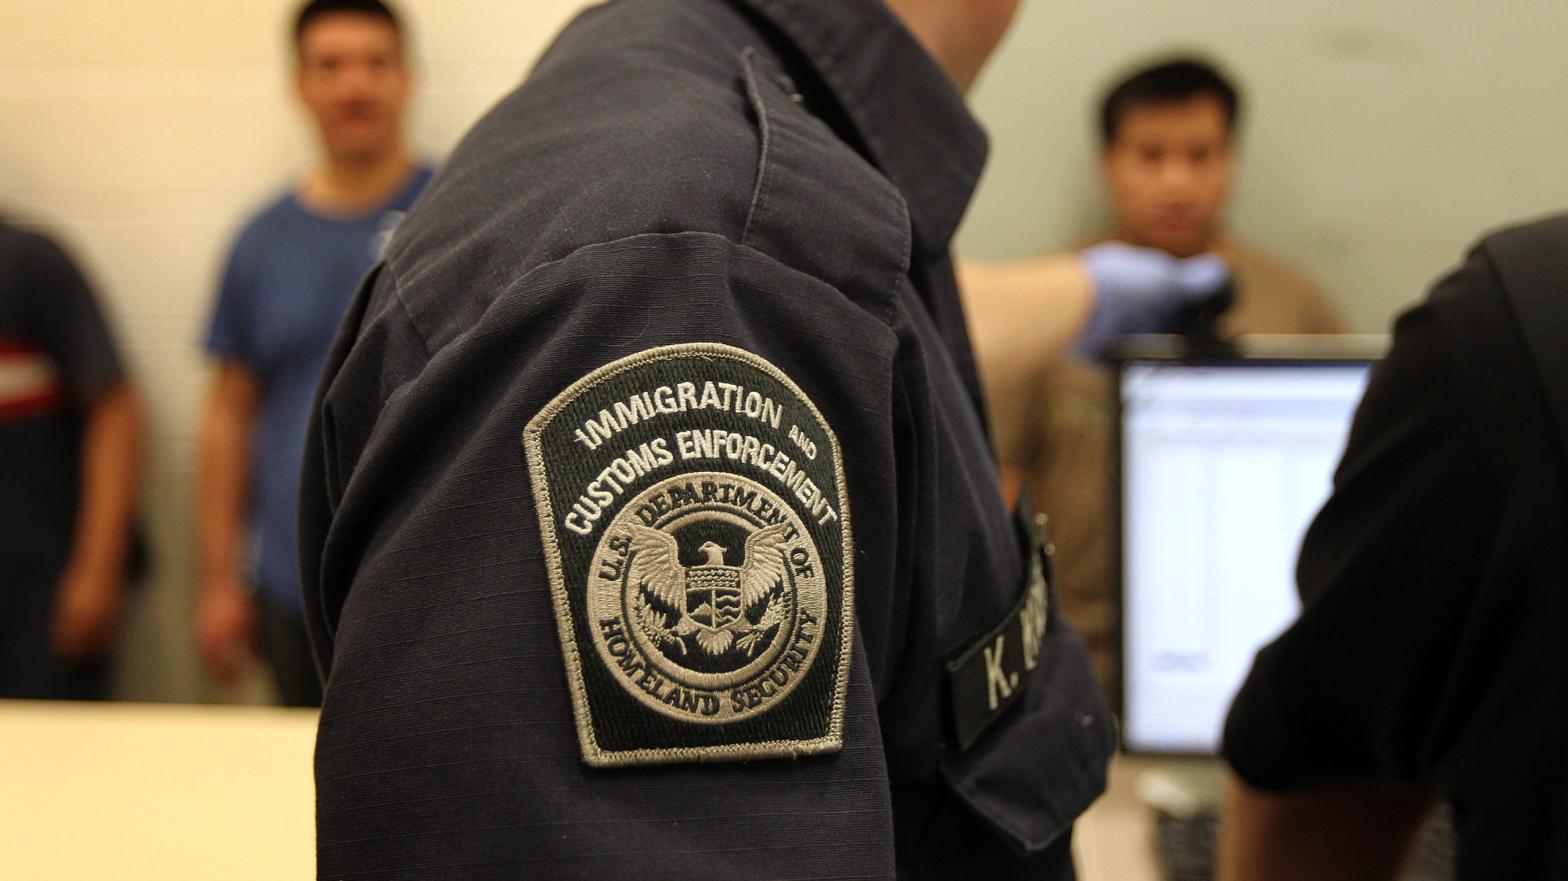 An Immigration and Customs Enforcement officer at a detention facility in Pheonix, Arizona in April 2010. (Photo: John Moore, Getty Images)